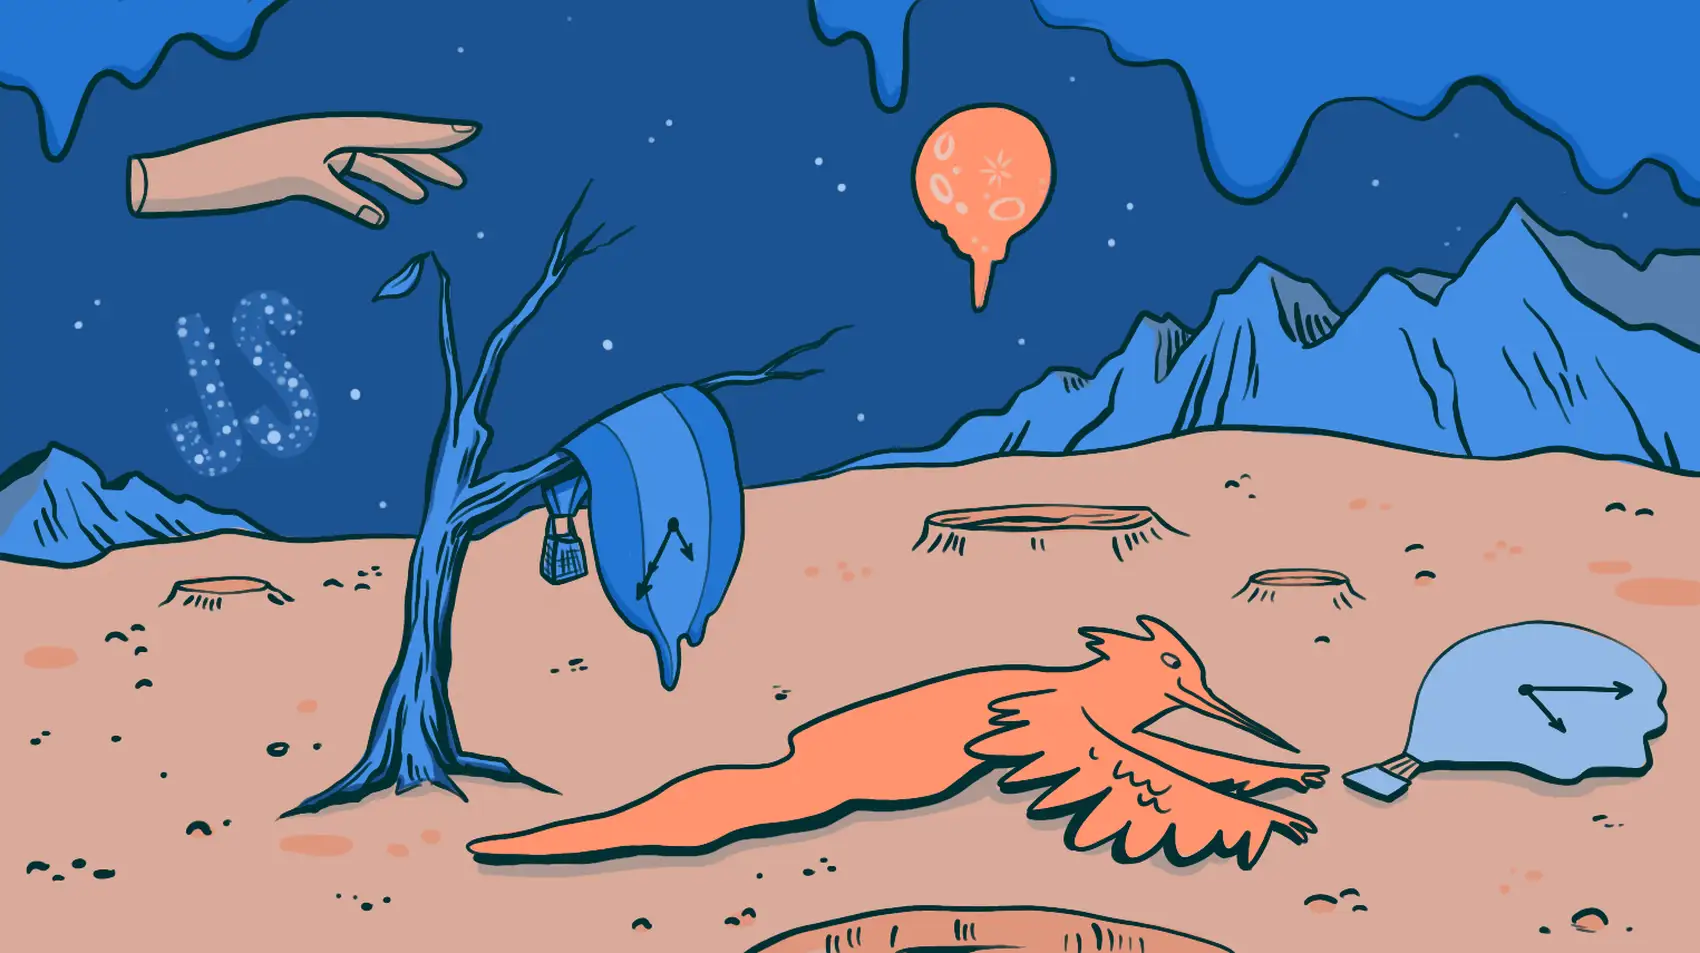 A landscape vaguely inspired by Salvador Dali's The Persistence of Memory  including a melted baloon clock, craters, a disembodied hand, mountains, and a JS logo in the sky